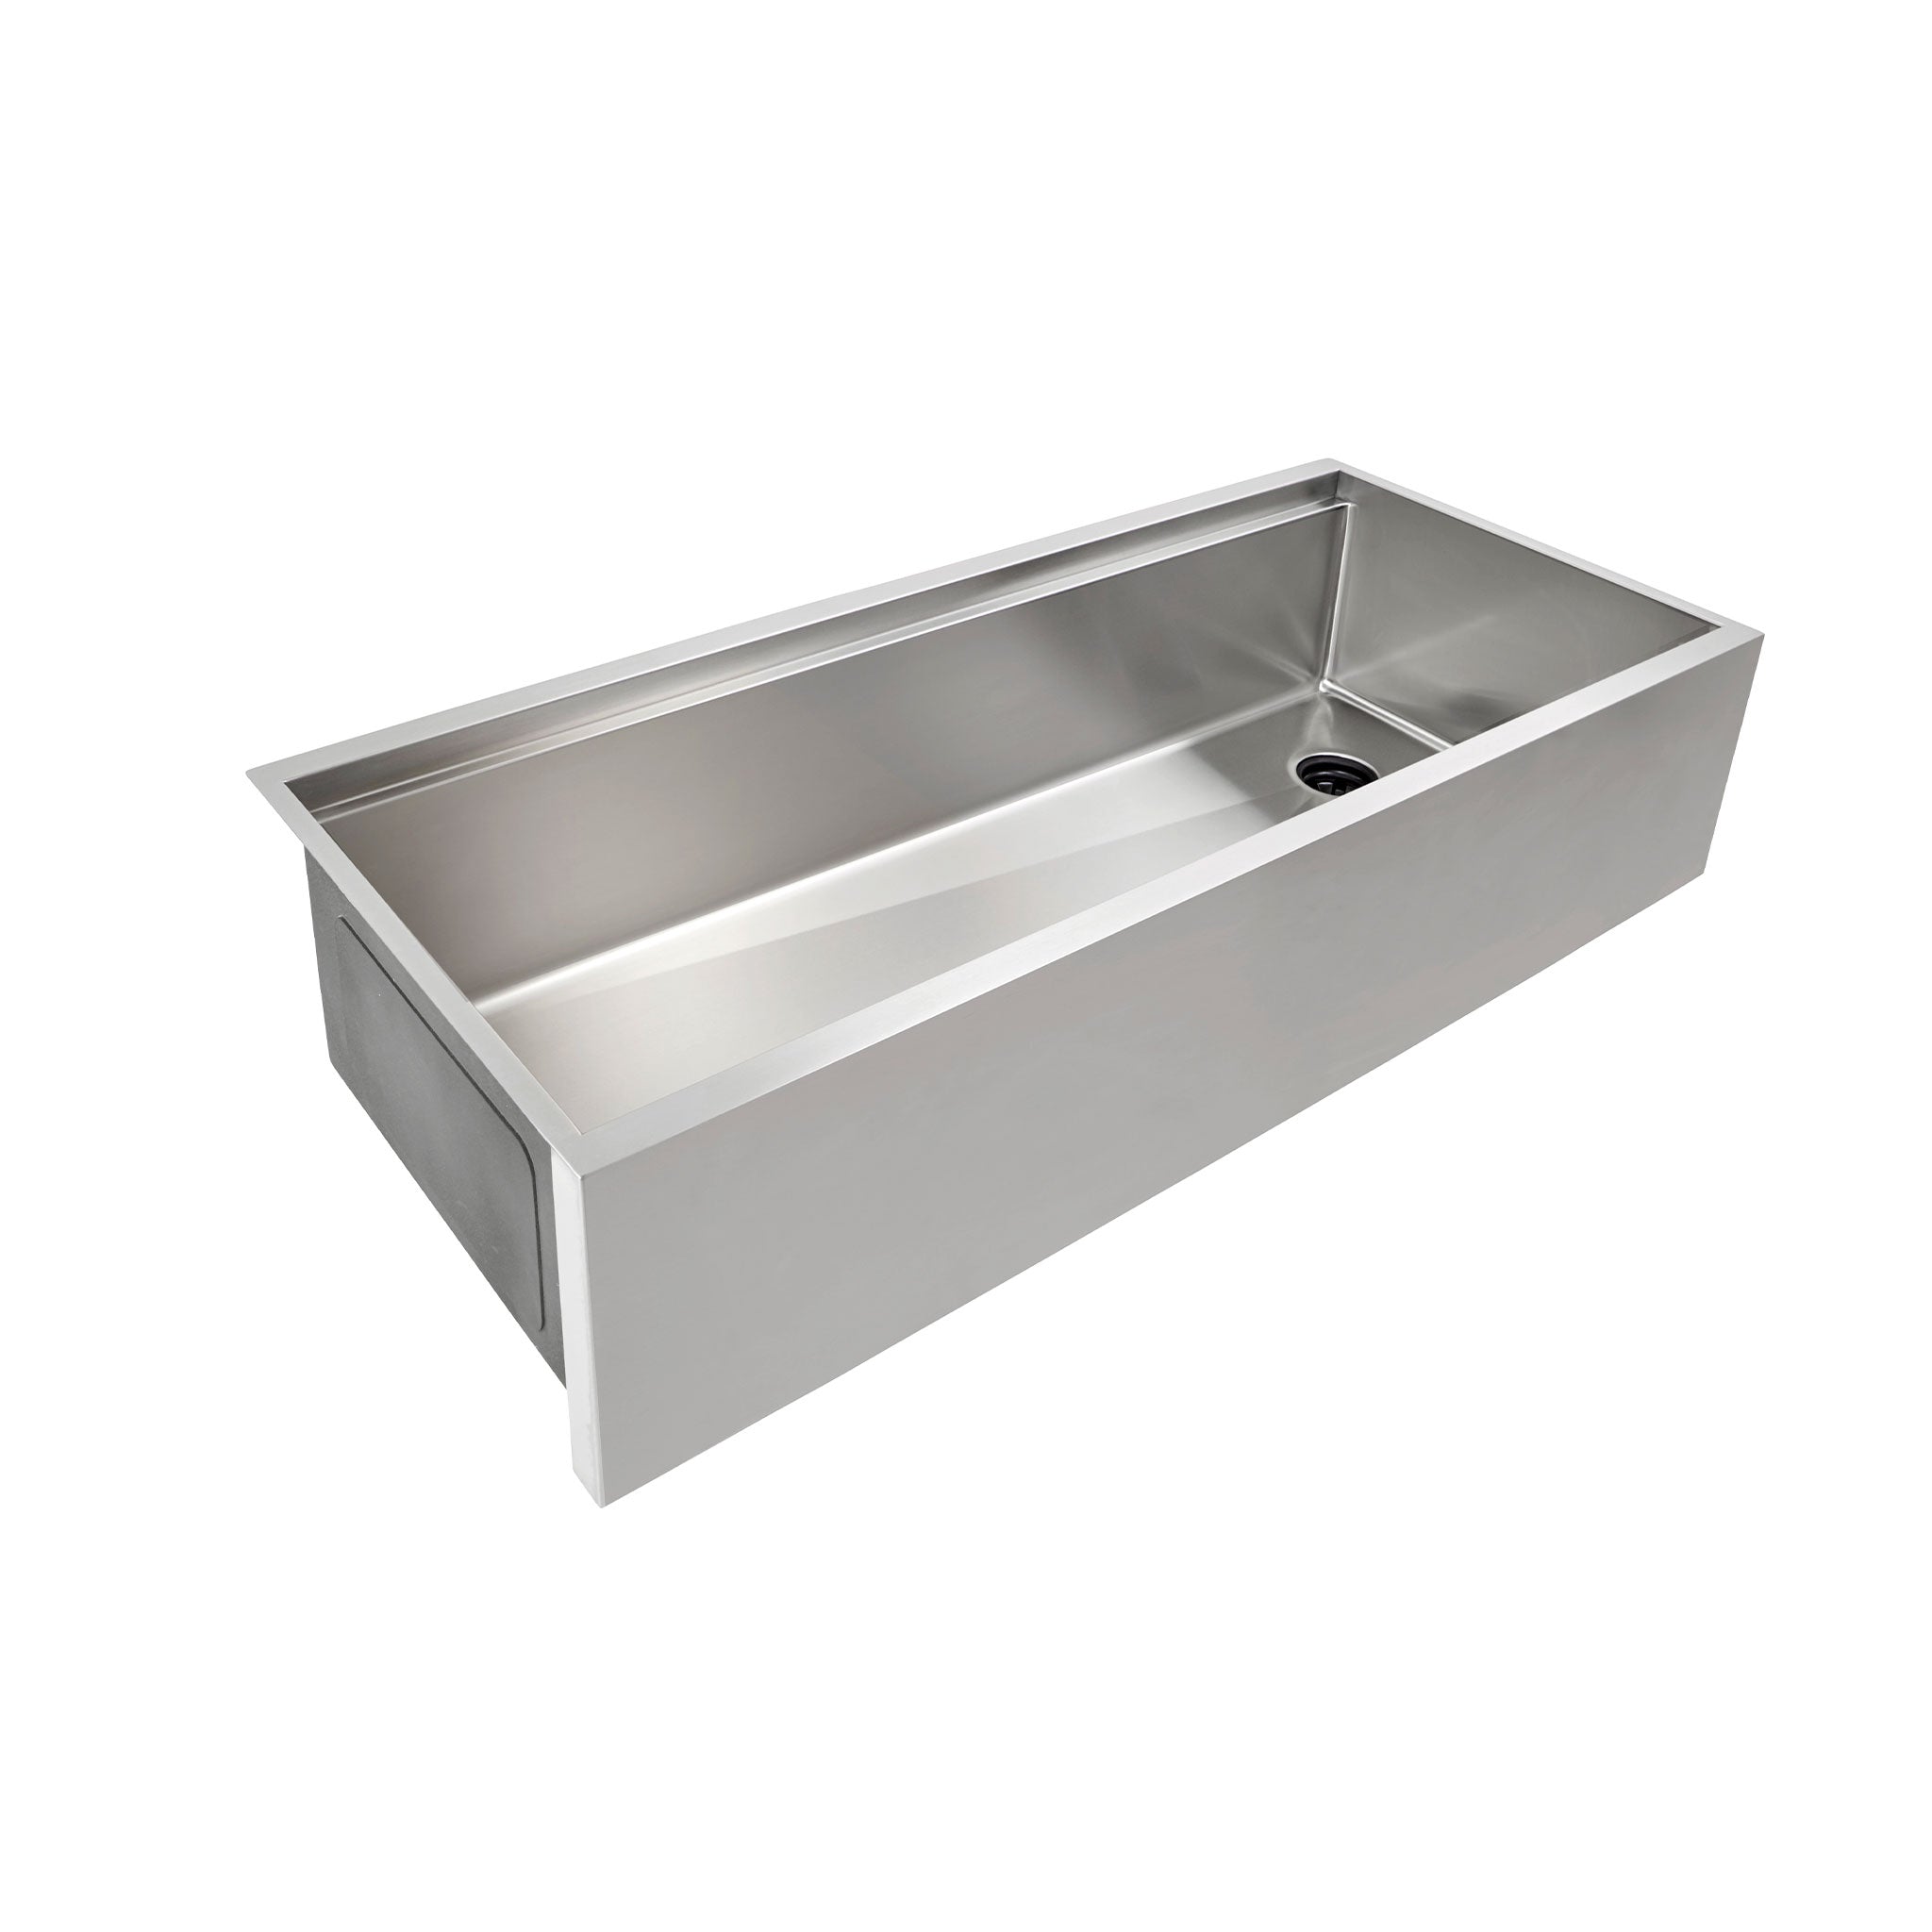 Large 46 inch 16 gauge stainless steel apron front farmhouse workstation sink with offset drain on the right and Create Good Sinks seamless drain design